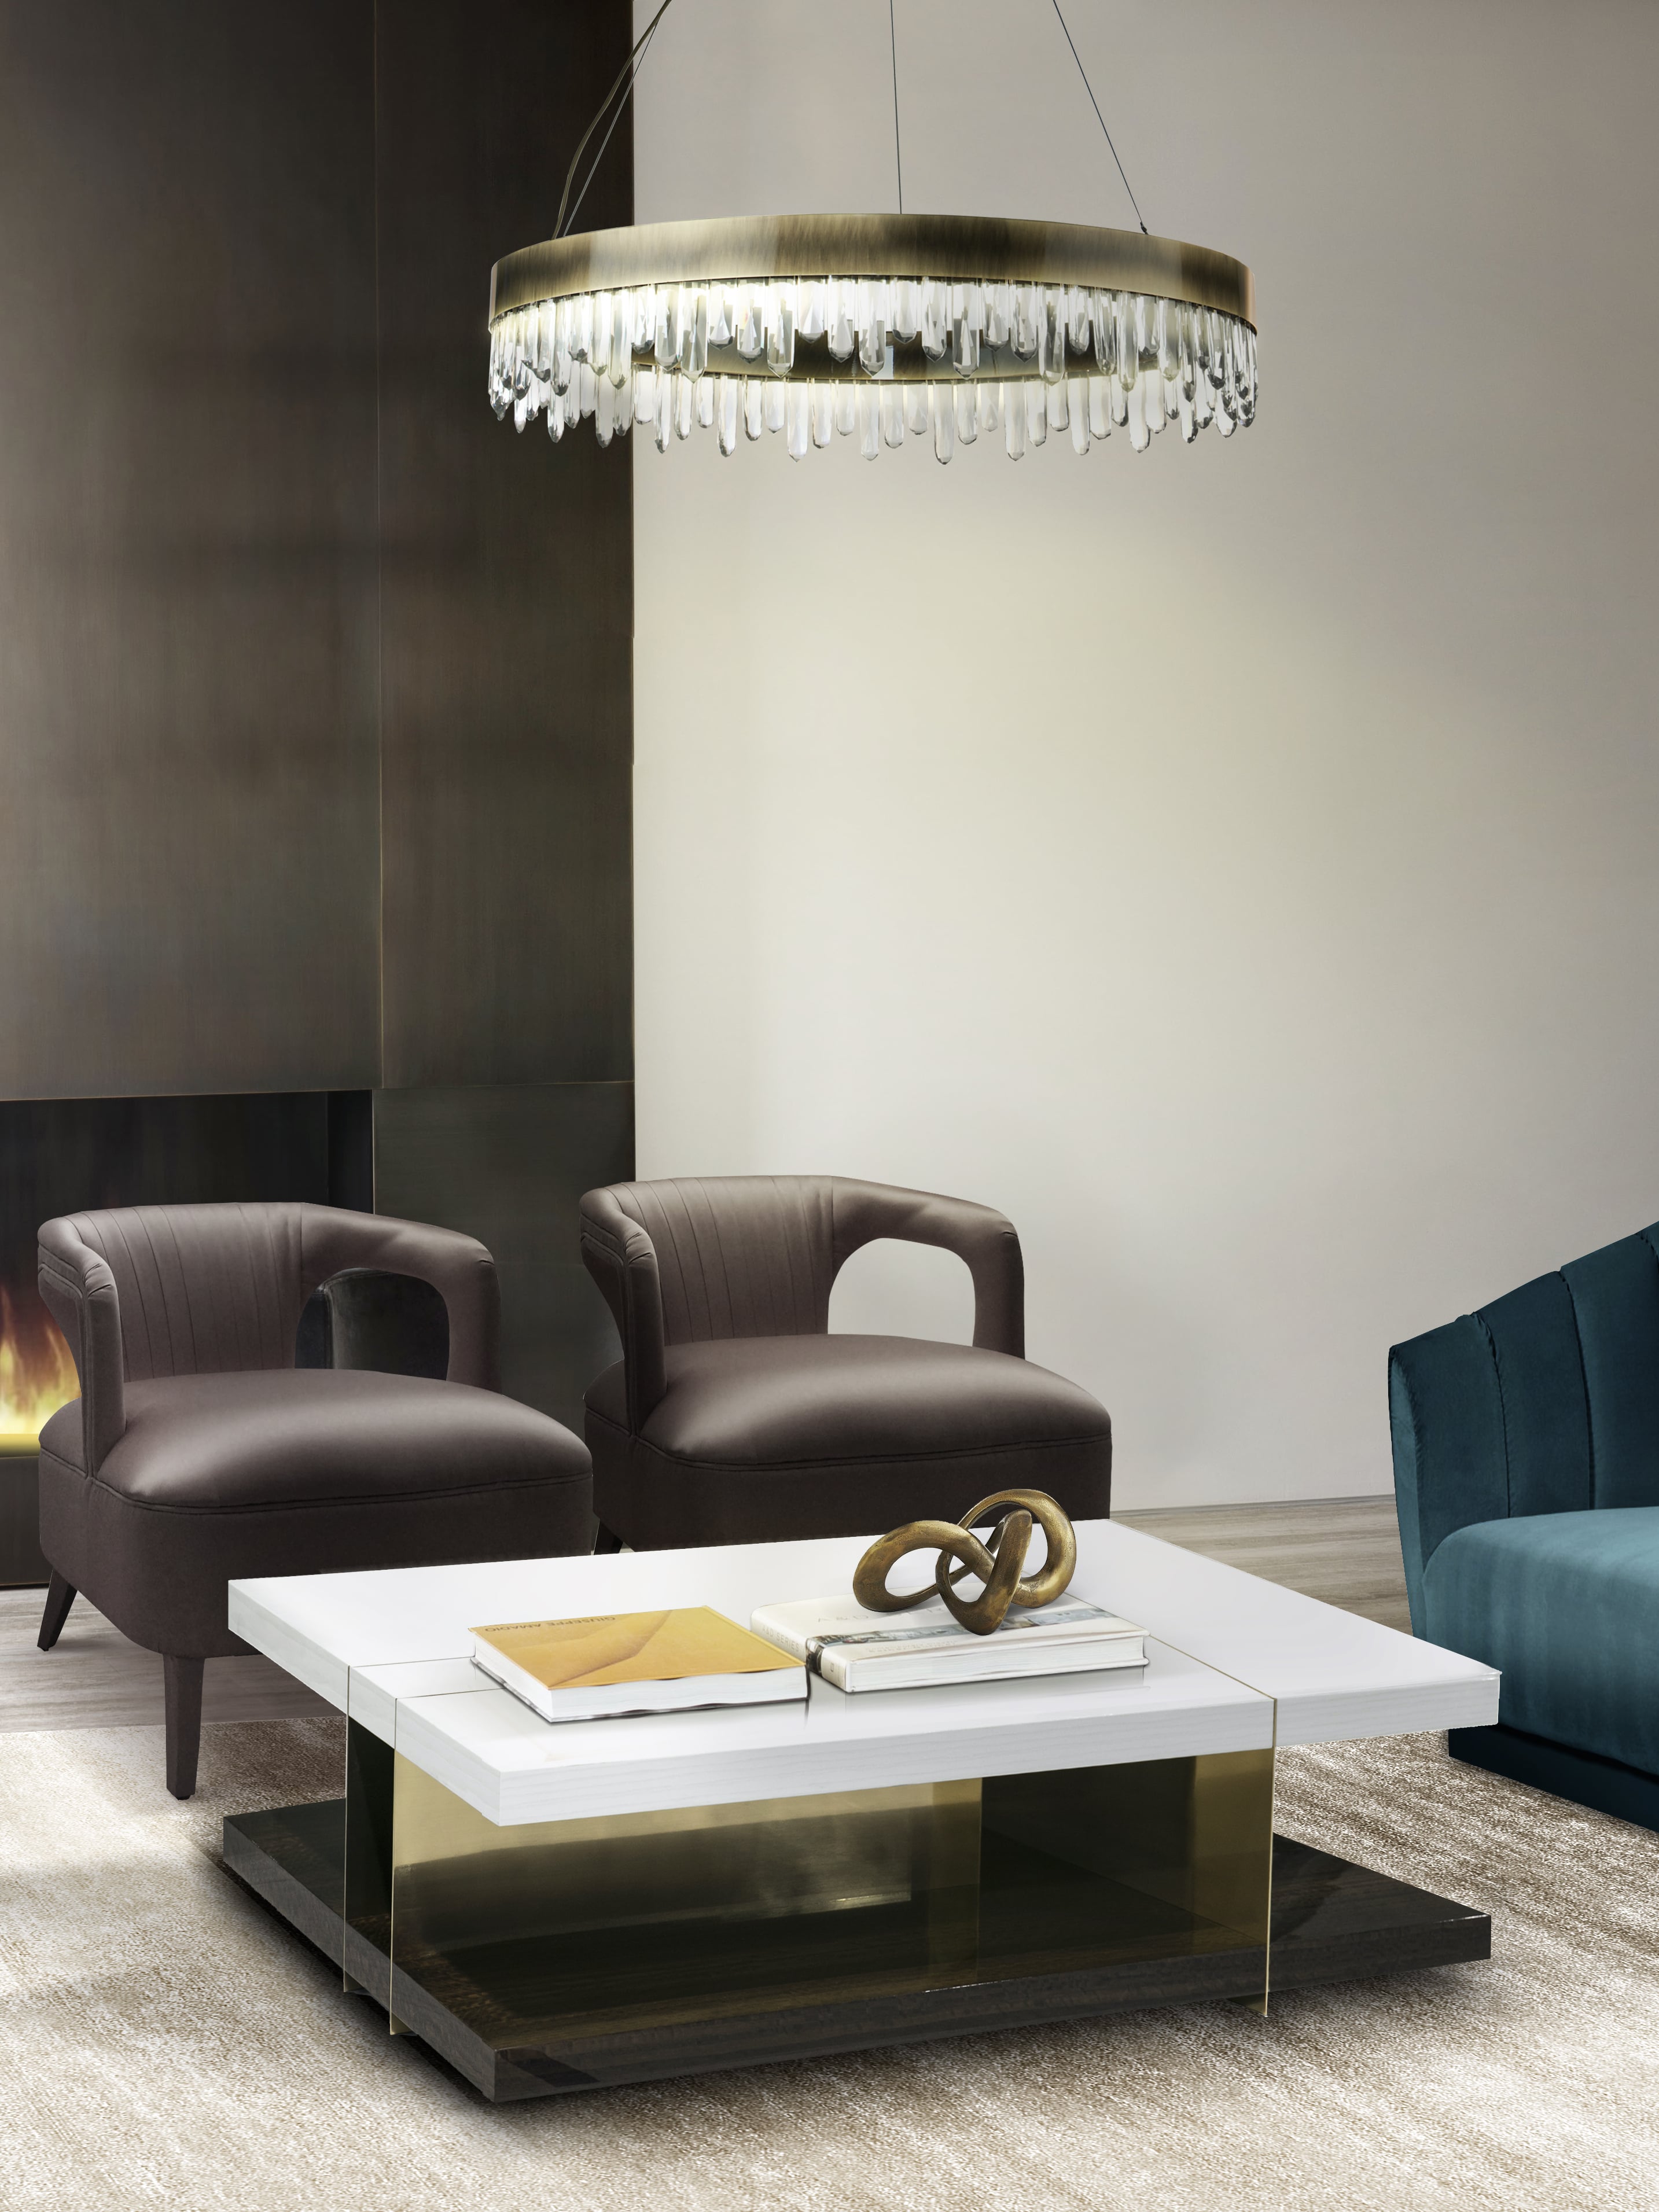 Modern Living Room With Satin Textured Armchair - Home'Society